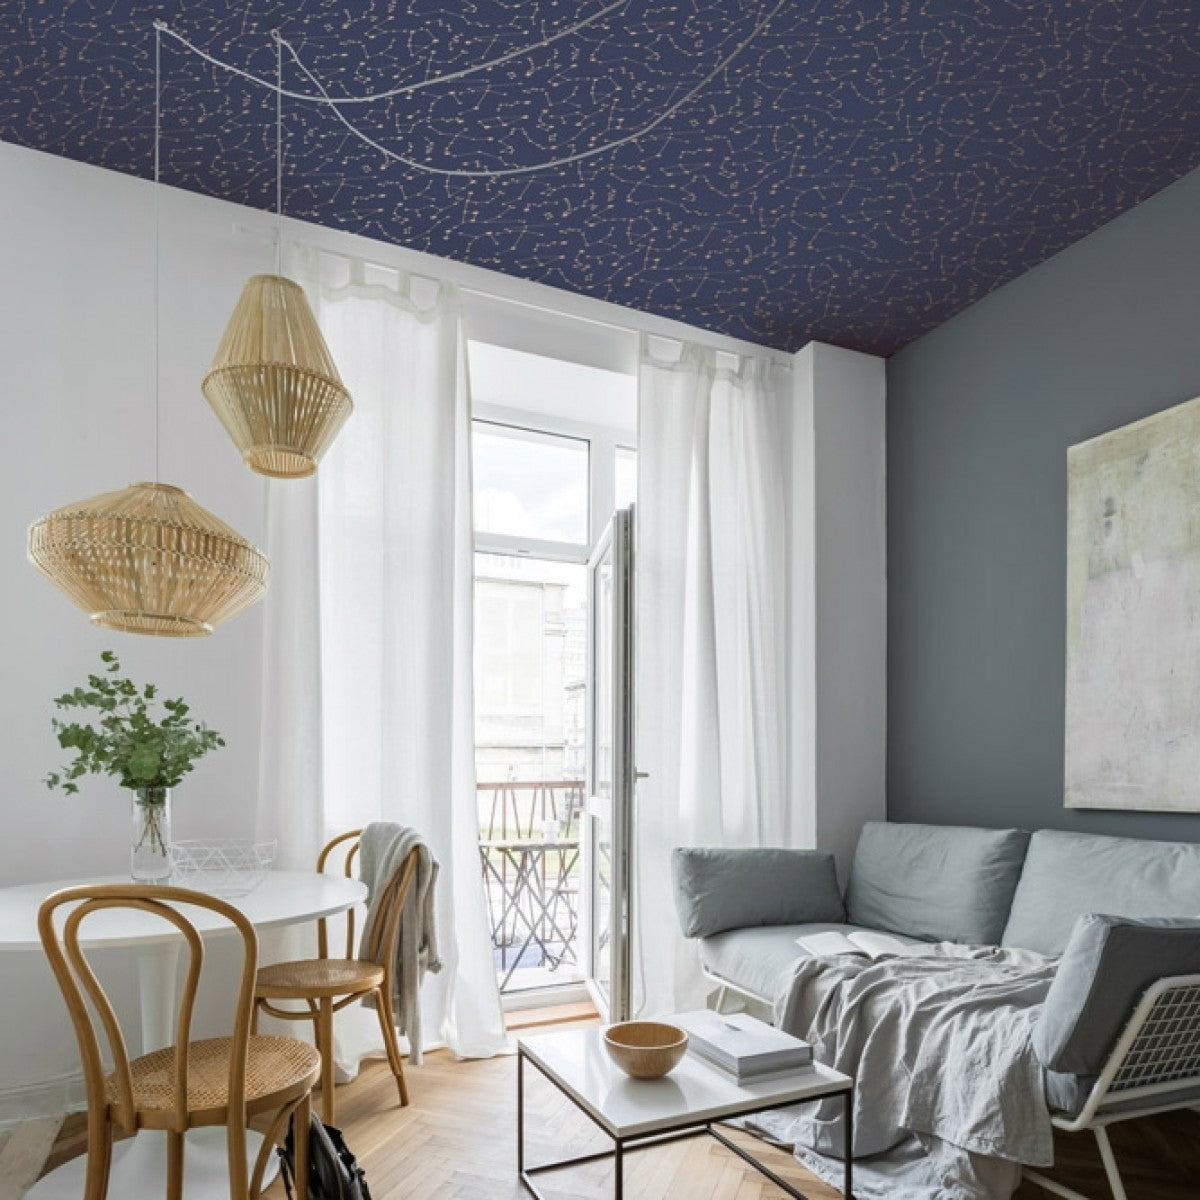 Constellations Navy CO472 Self-Adhesive Wallpaper